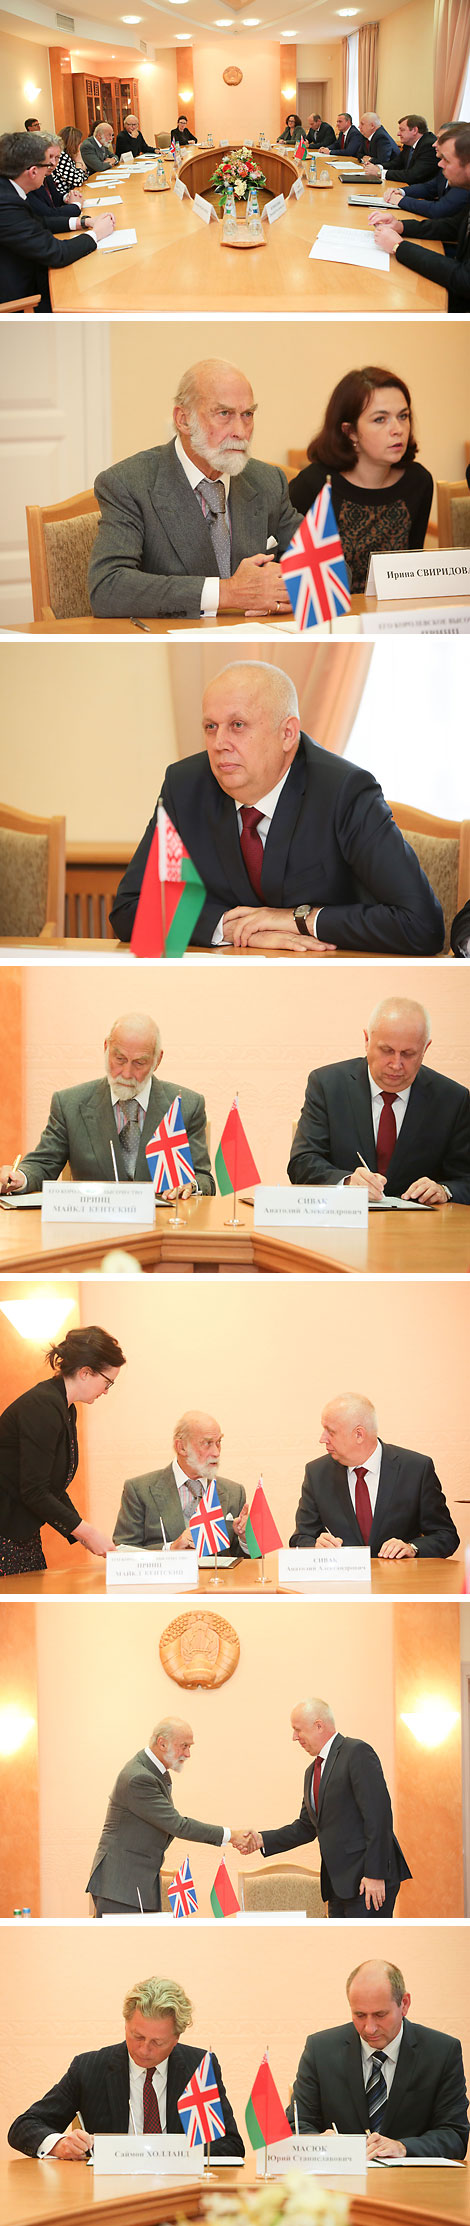 Prince Michael of Kent and Transport and Communications Minister Anatoly Sivak